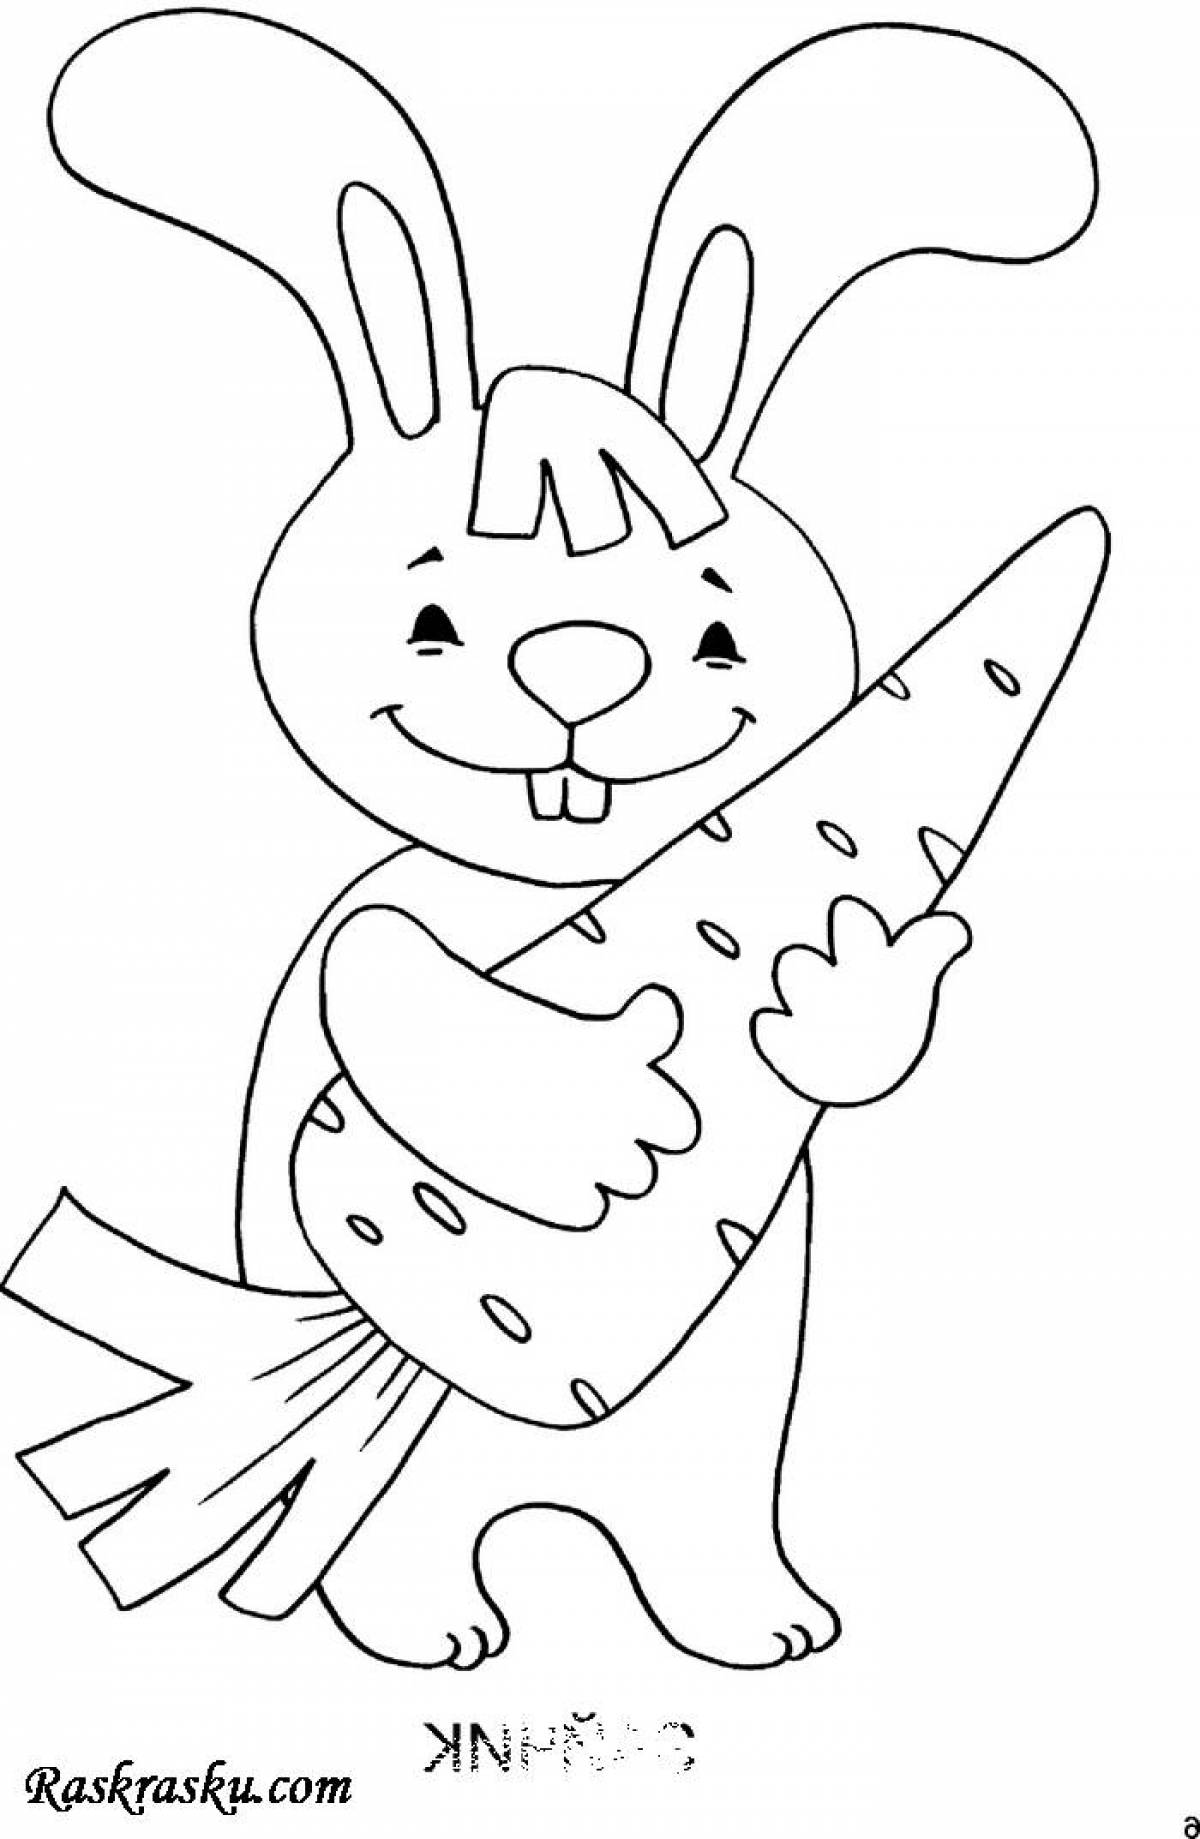 Playful rabbit coloring for kids